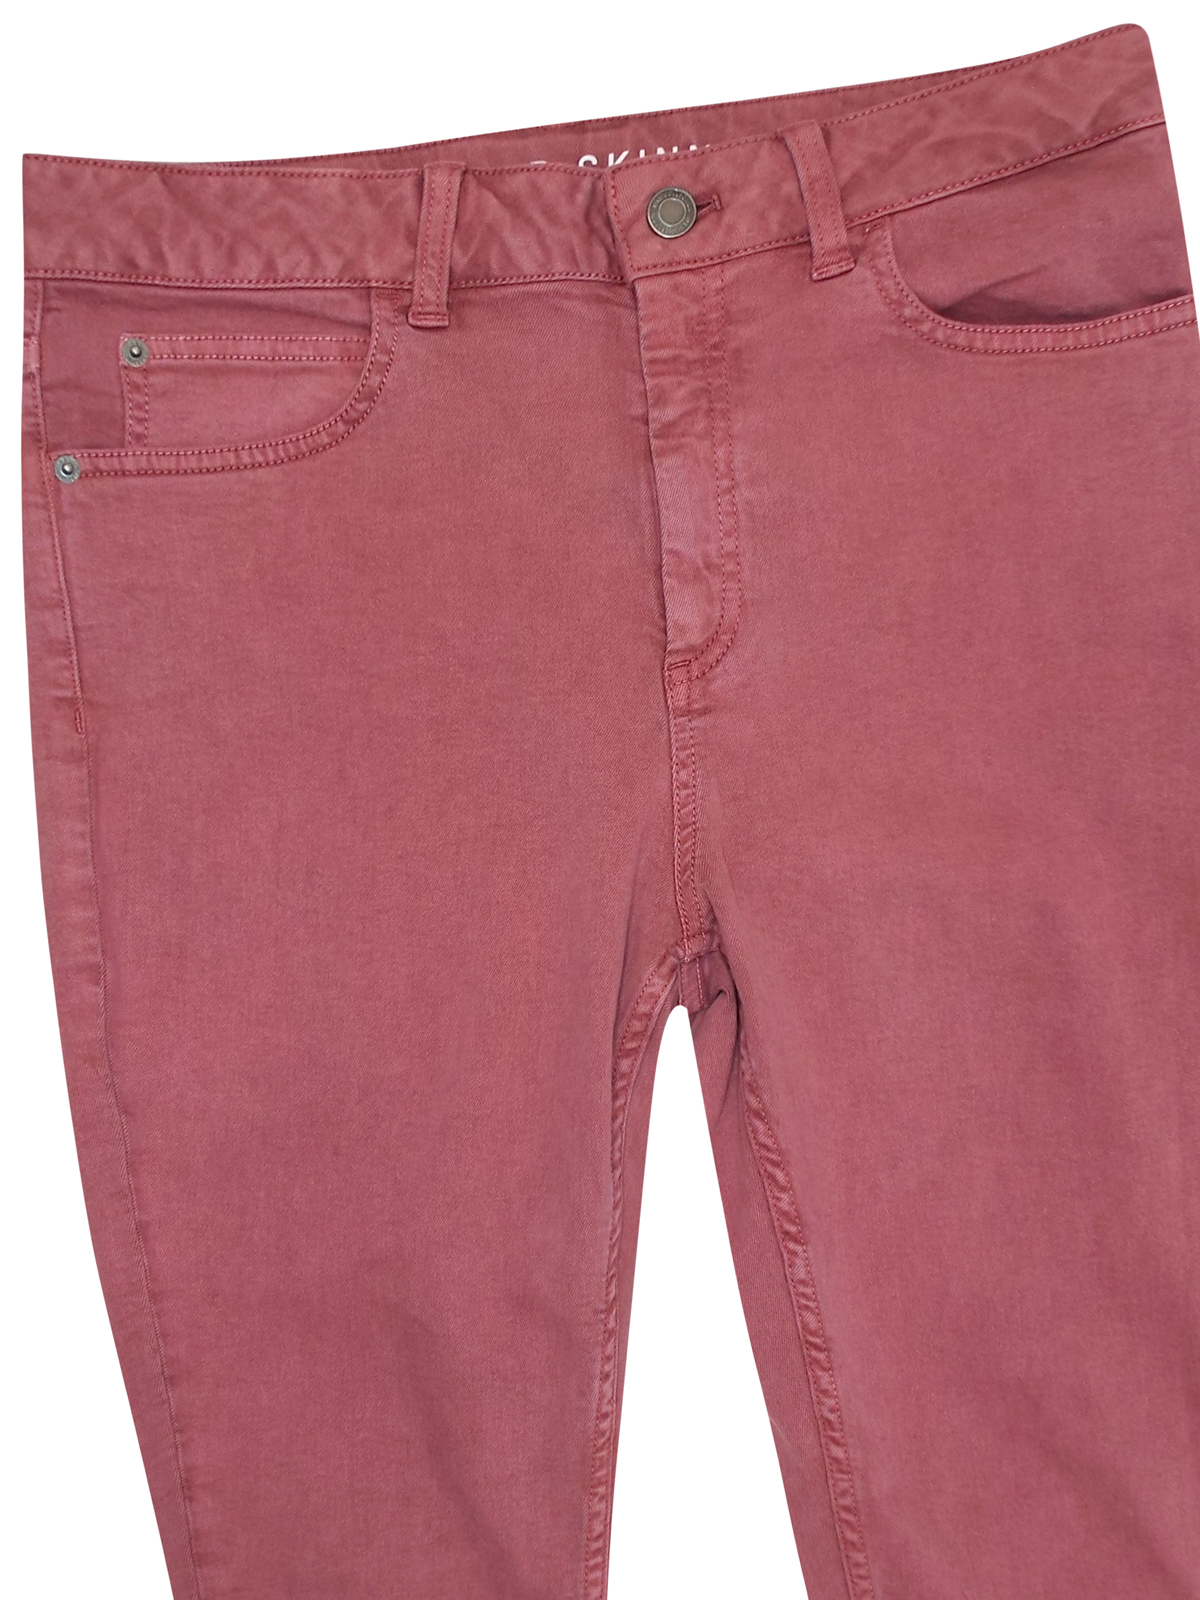 Marks and Spencer - - M&5 ROSE-PINK Mid Rise Super Skinny Jeans - Size 12